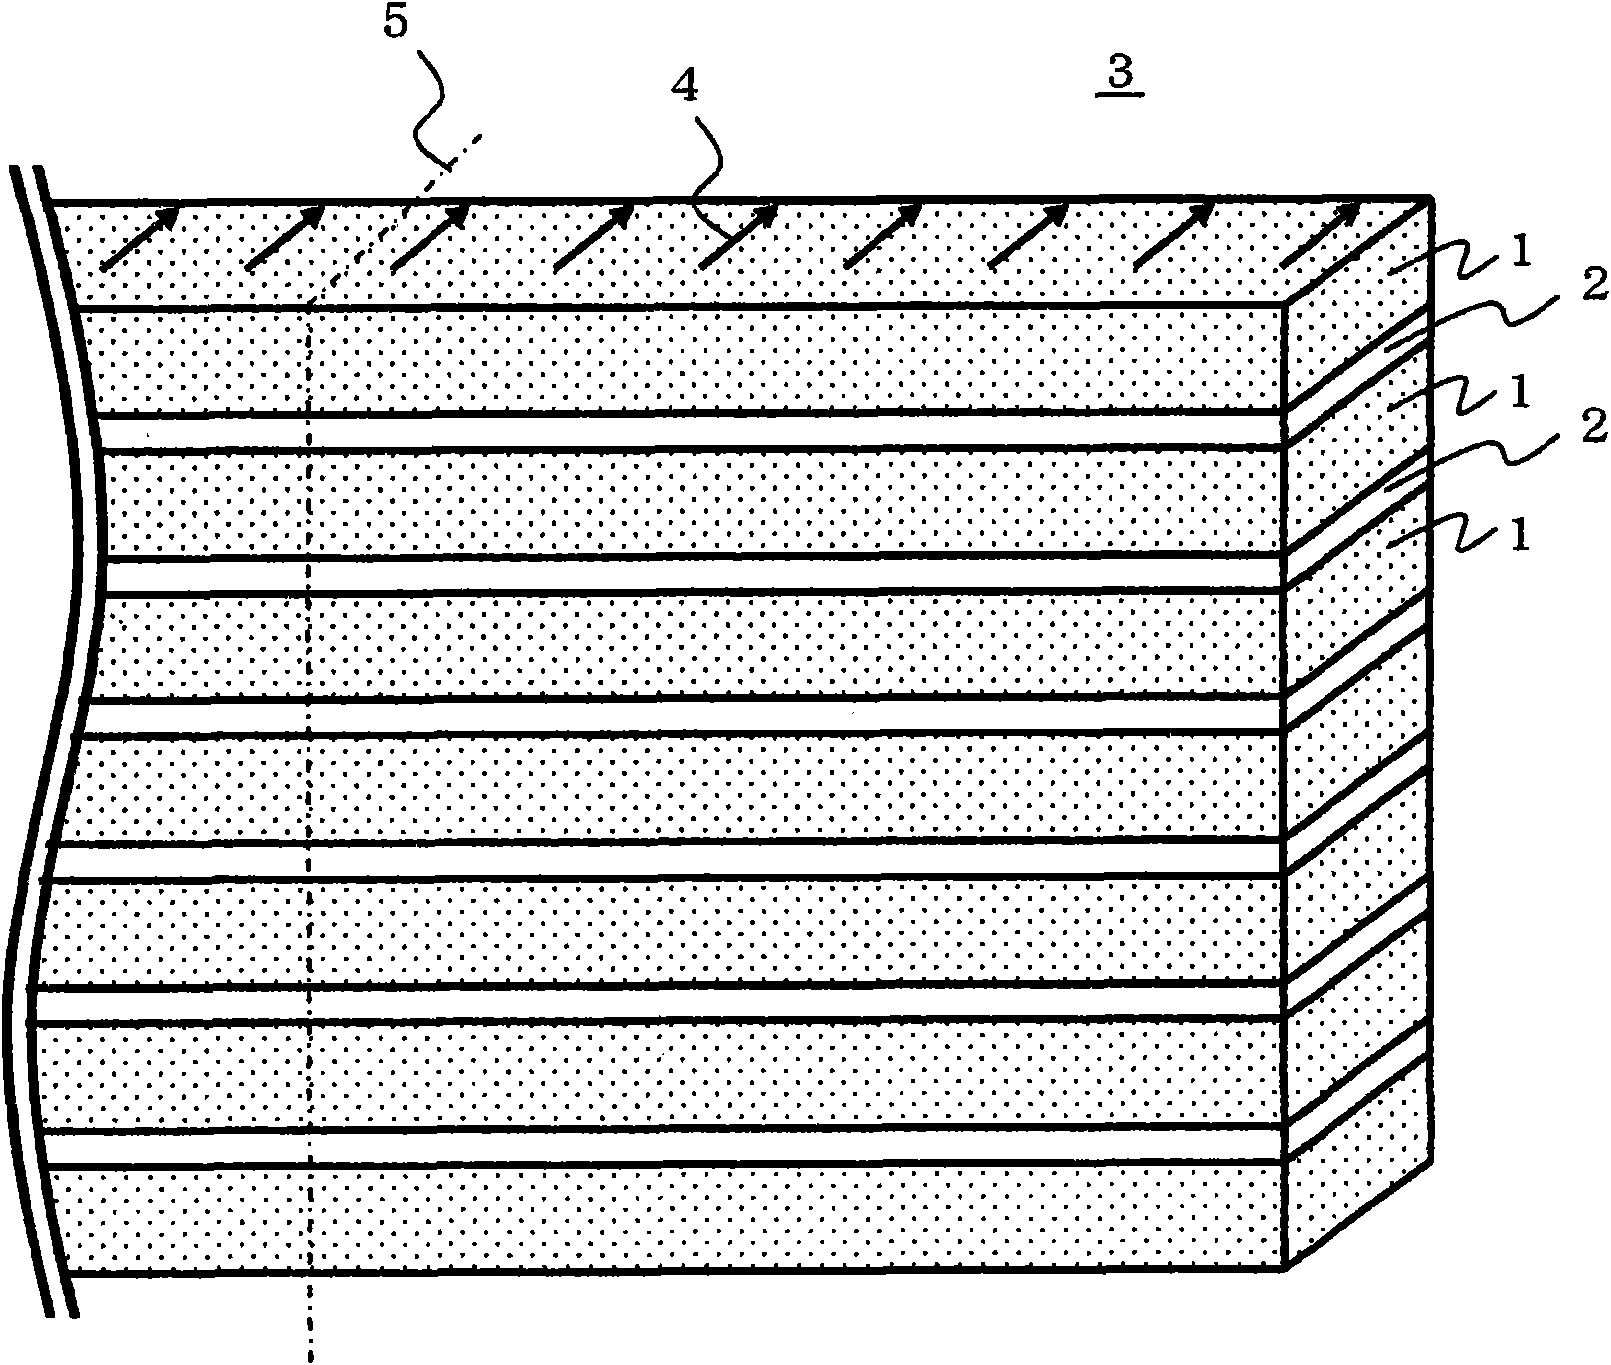 Magnetic core for antenna, method for producing magnetic core for antenna, and antenna